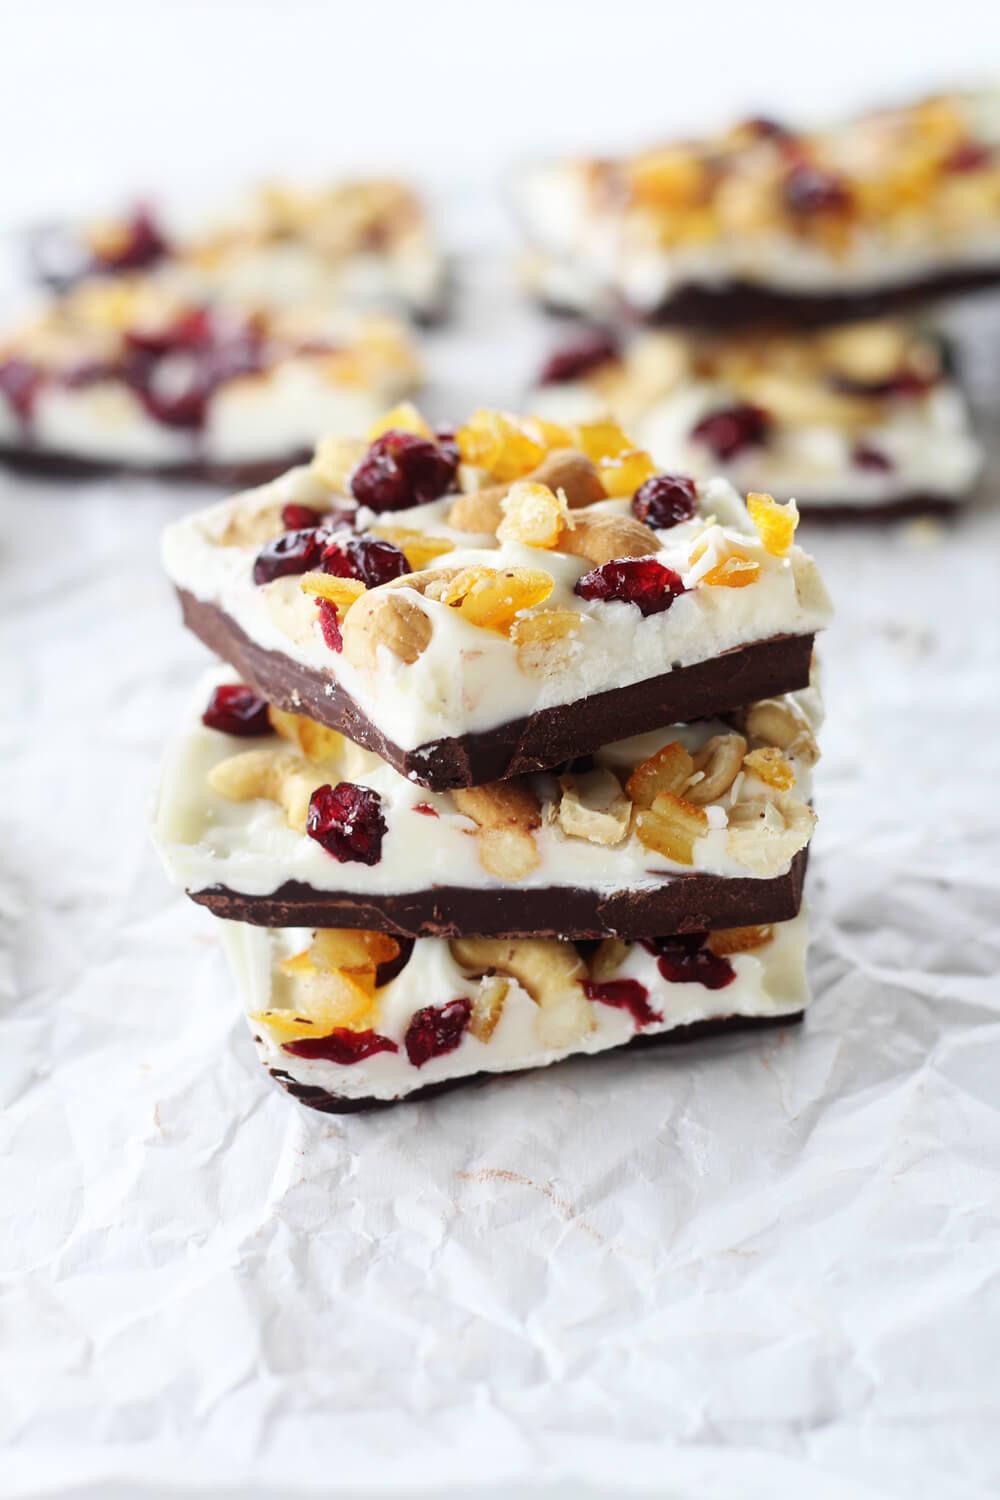 Chocolate Bark with Nuts and Dried Fruit